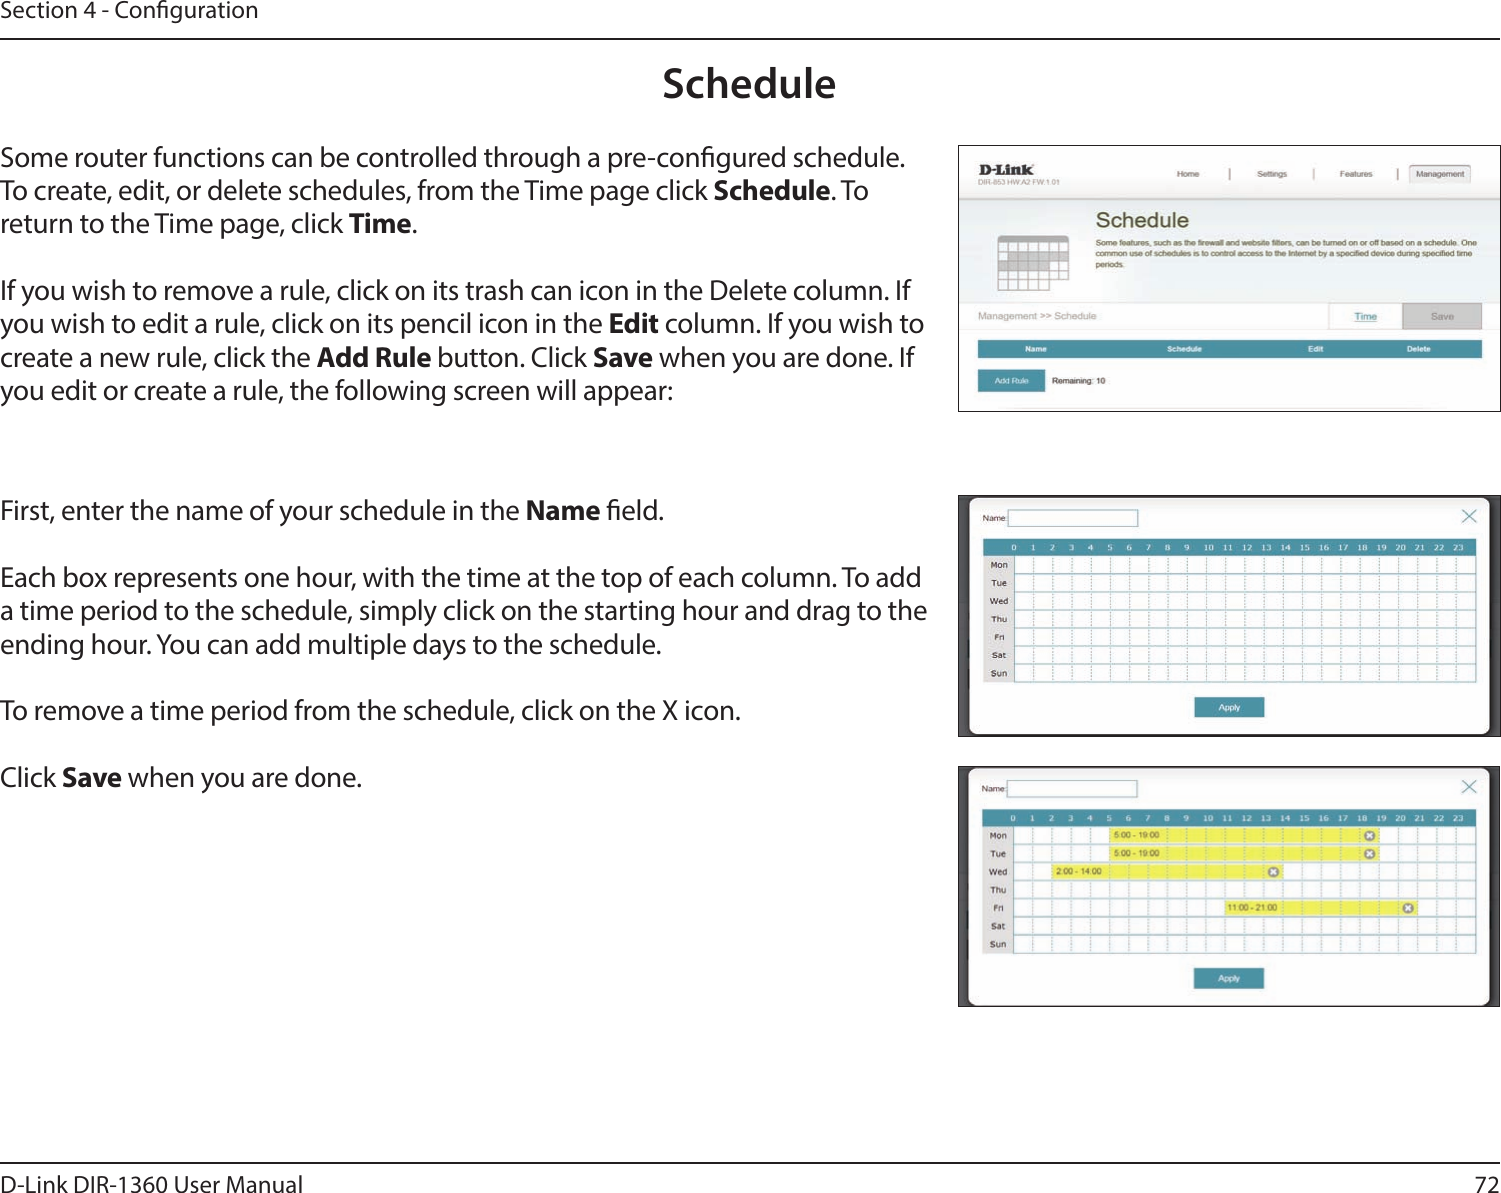 72D-Link DIR-1360 User ManualSection 4 - CongurationScheduleSome router functions can be controlled through a pre-congured schedule. To create, edit, or delete schedules, from the Time page click Schedule. To return to the Time page, click Time. If you wish to remove a rule, click on its trash can icon in the Delete column. If you wish to edit a rule, click on its pencil icon in the Edit column. If you wish to create a new rule, click the Add Rule button. Click Save when you are done. If you edit or create a rule, the following screen will appear:First, enter the name of your schedule in the Name eld.Each box represents one hour, with the time at the top of each column. To add a time period to the schedule, simply click on the starting hour and drag to the ending hour. You can add multiple days to the schedule.To remove a time period from the schedule, click on the X icon.Click Save when you are done.